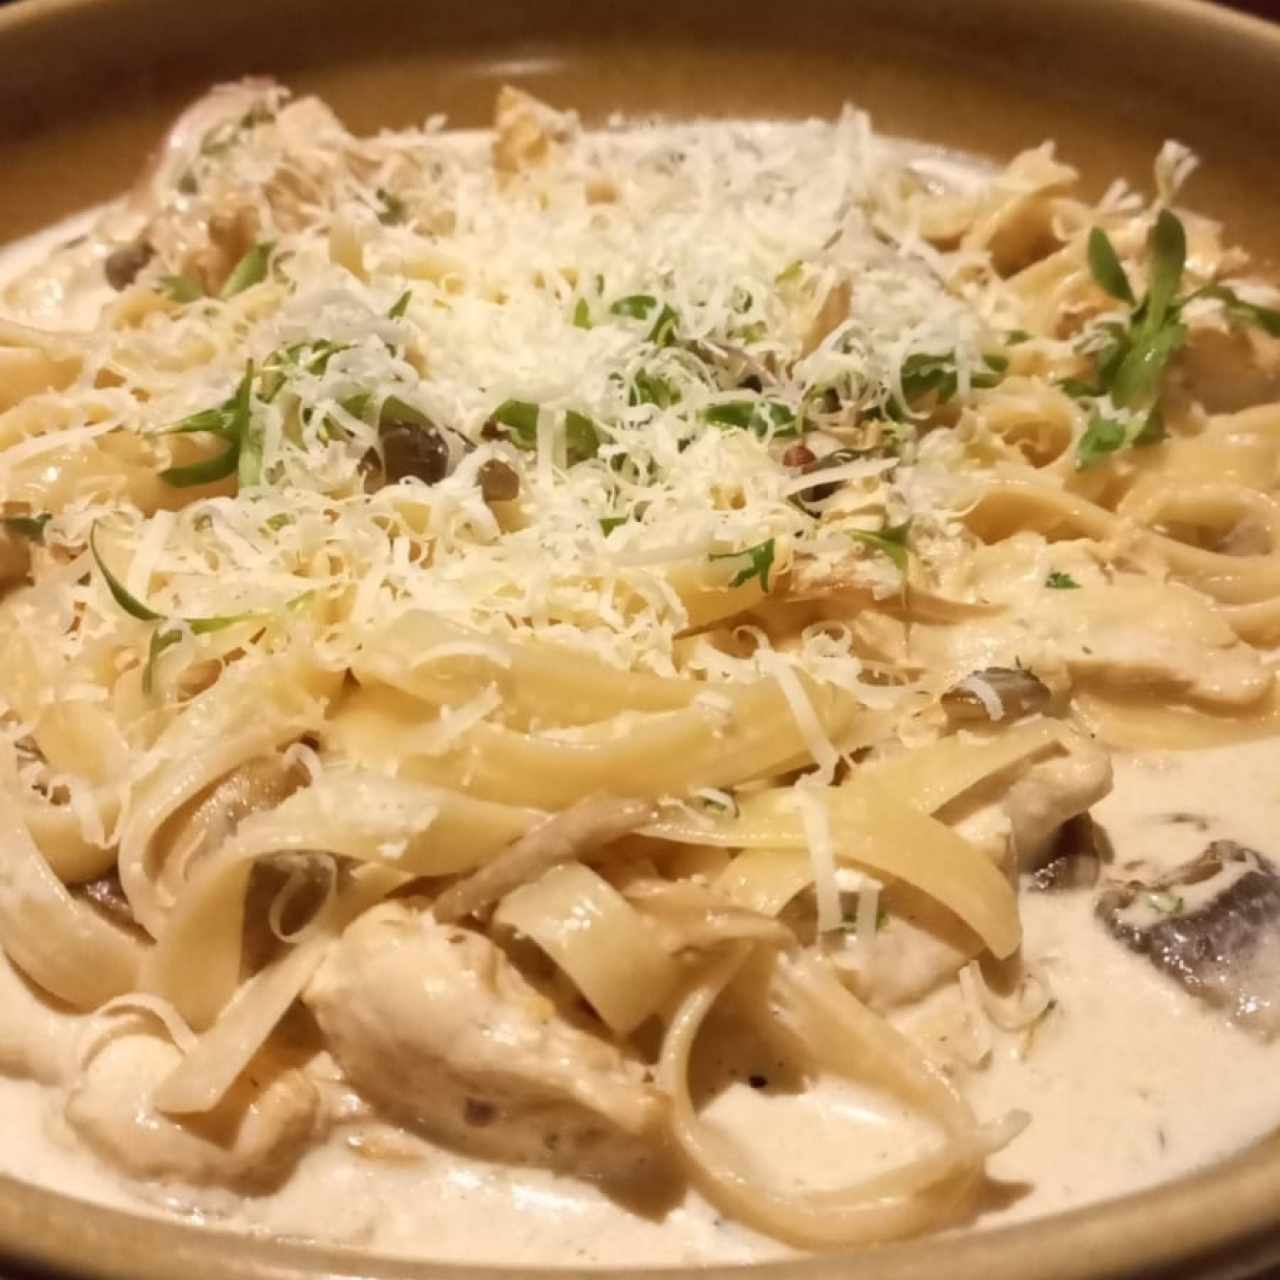 Creamy Pasta With Pieces Of Chicken